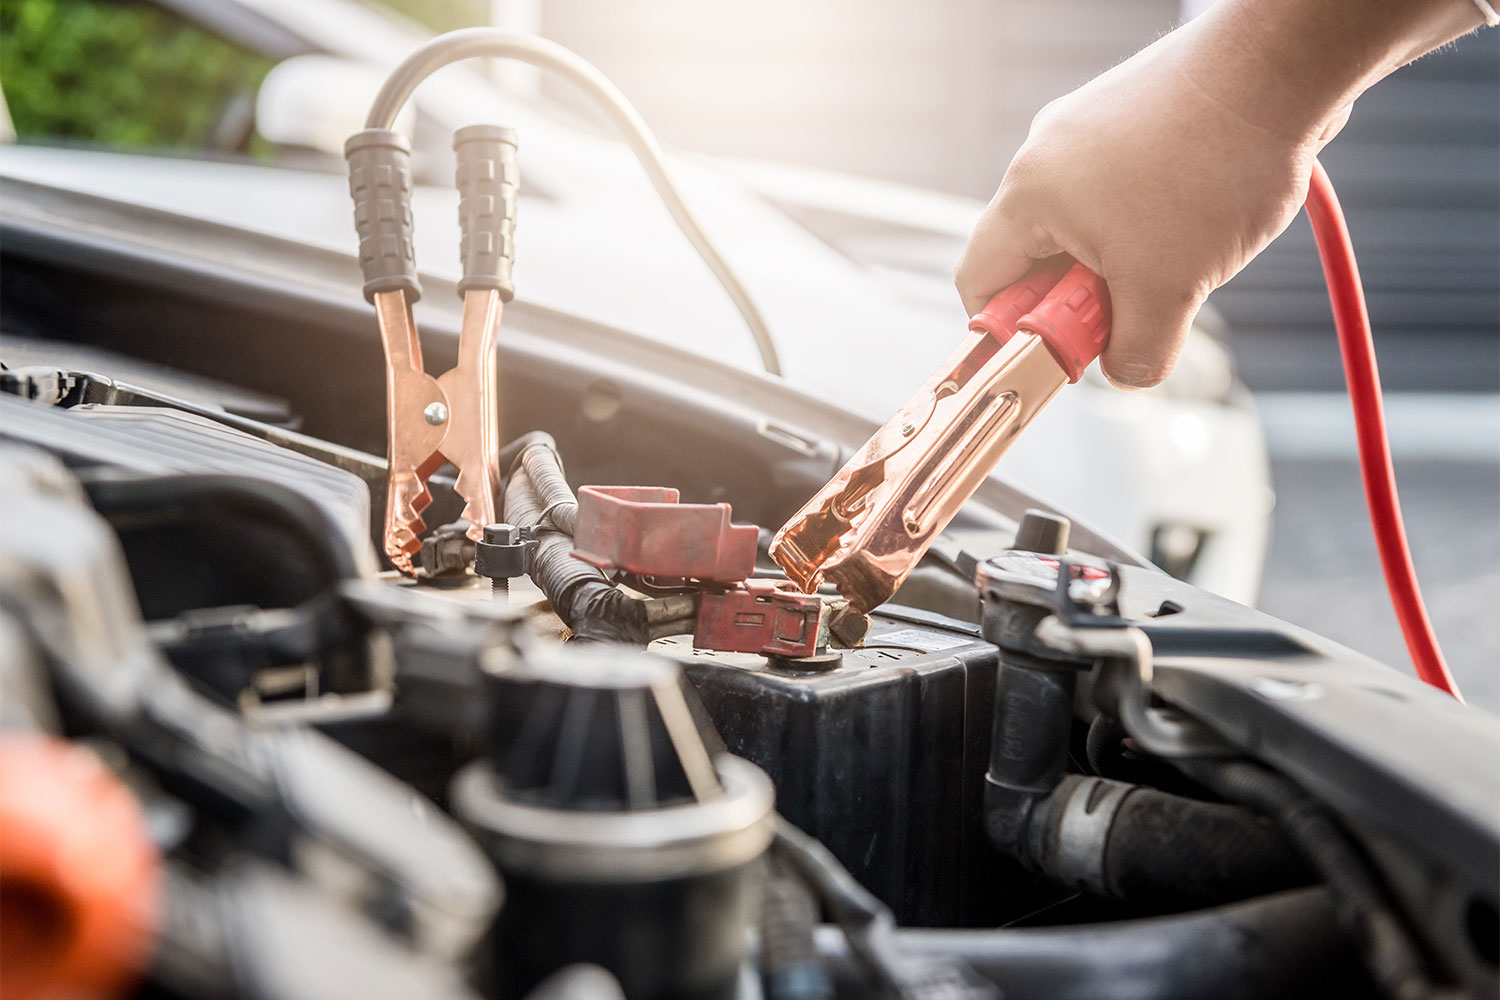 A well-prepared motorist's guide: How to jump-start a car - The Manual